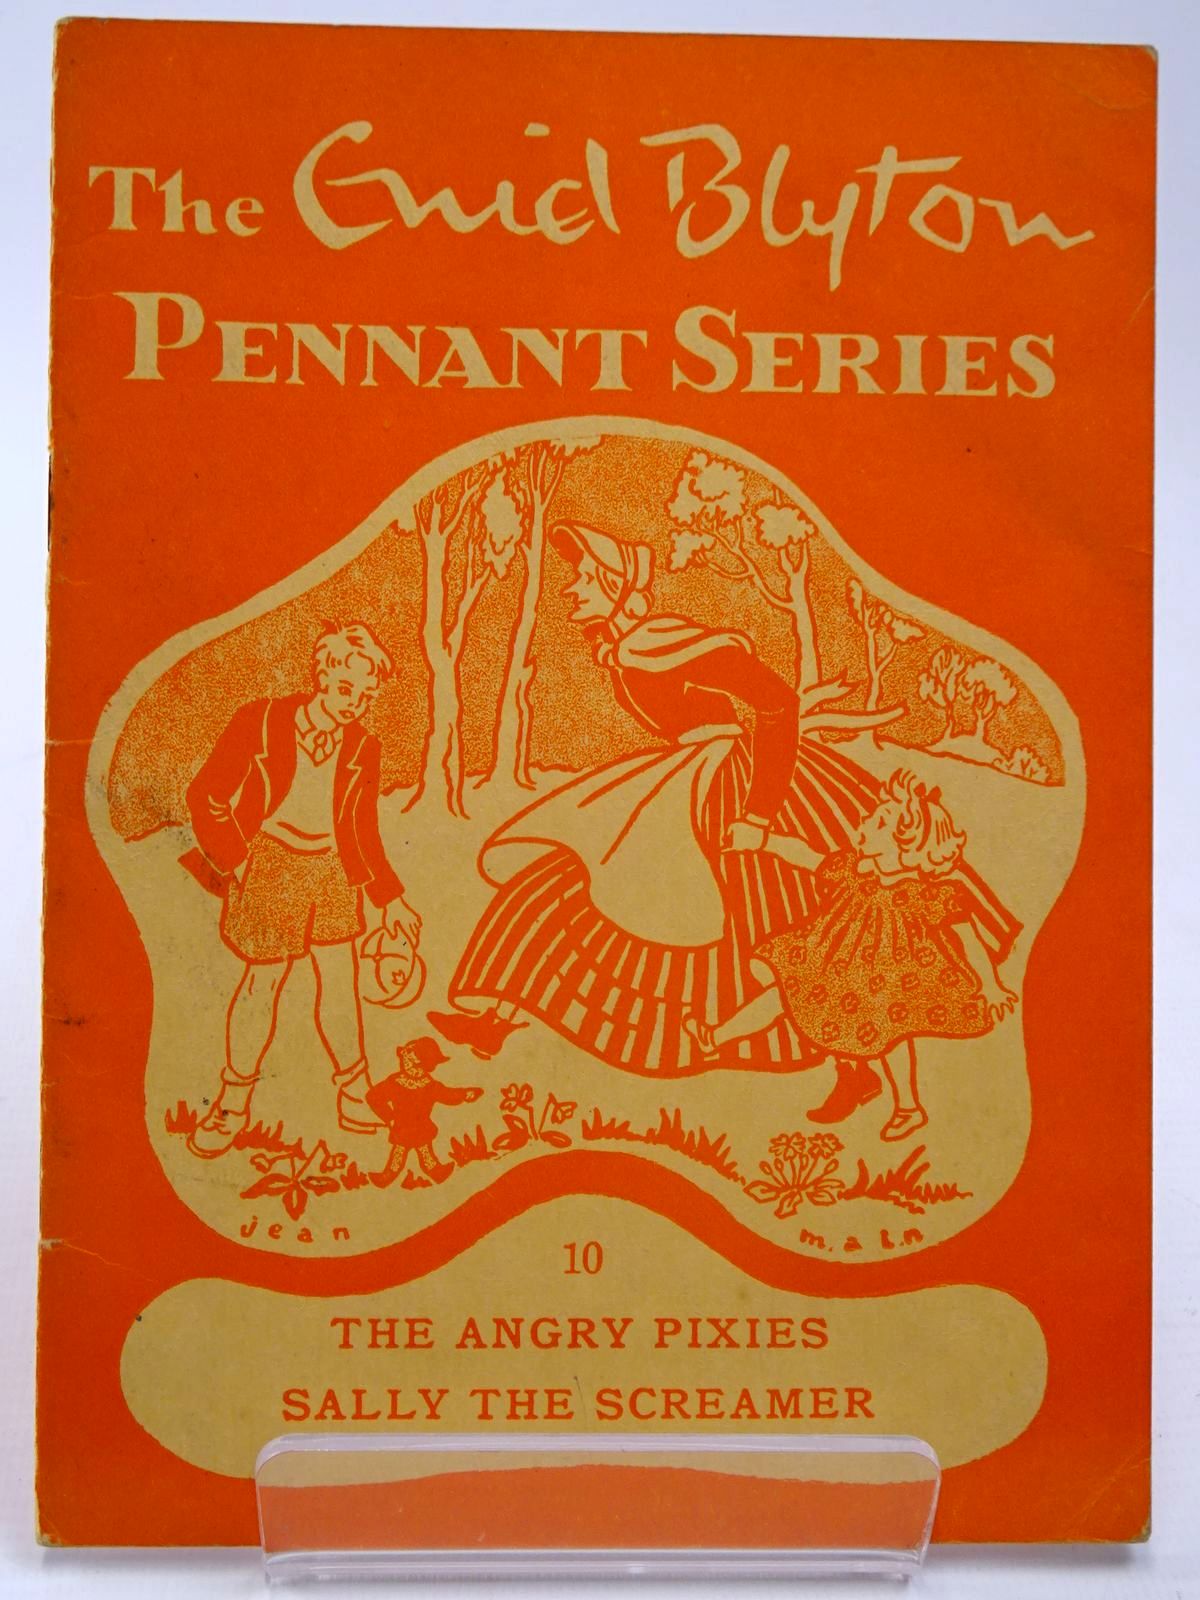 Photo of THE ENID BLYTON PENNANT SERIES No. 10 THE ANGRY PIXIES / SALLY THE SCREAMER written by Blyton, Enid illustrated by Soper, Eileen
Main, Jean published by Macmillan & Co. Ltd. (STOCK CODE: 2130522)  for sale by Stella & Rose's Books